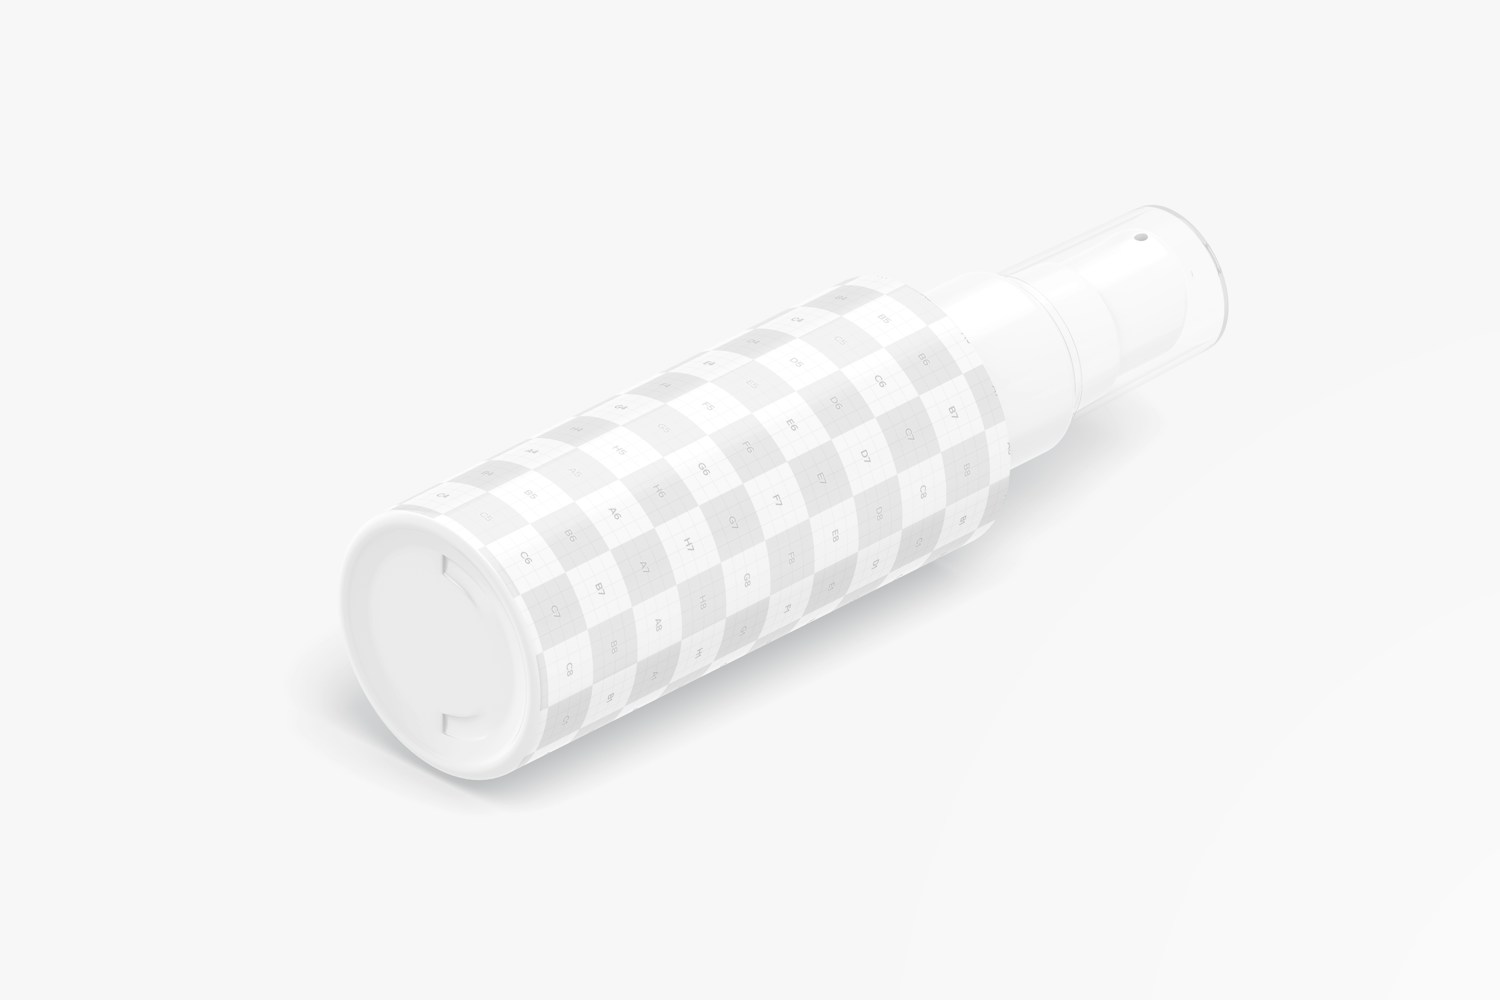 2 oz Pump Round Bottle Mockup, Isometric Right View